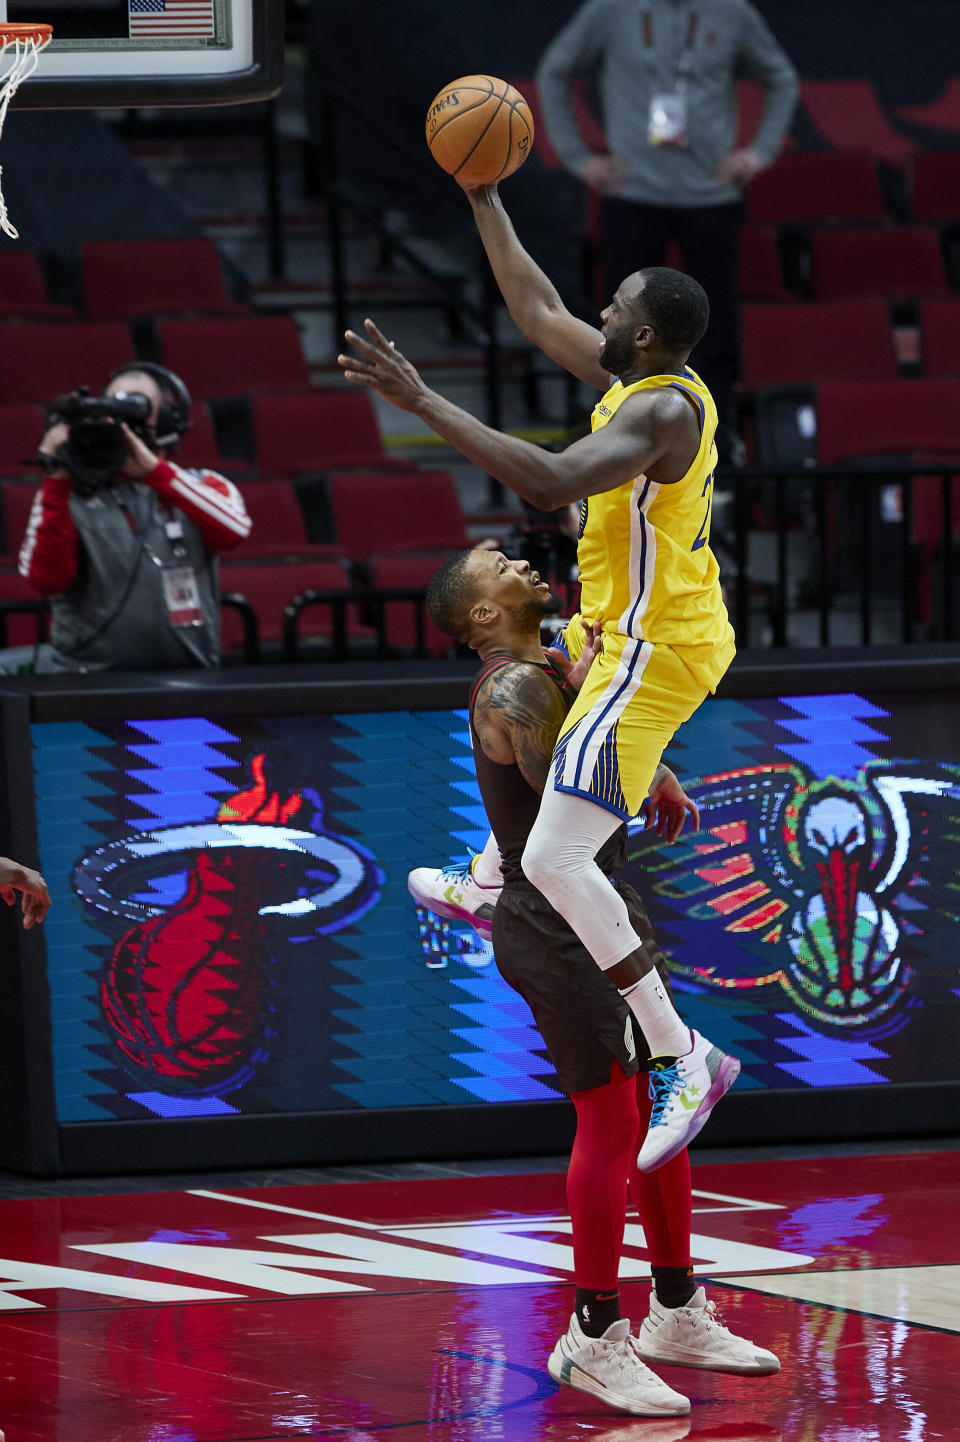 Portland Trail Blazers guard Damian Lillard, left, takes a charge from Golden State Warriors forward Draymond Green in the final seconds of the second half of an NBA basketball game in Portland, Ore., Wednesday, March 3, 2021. (AP Photo/Craig Mitchelldyer)